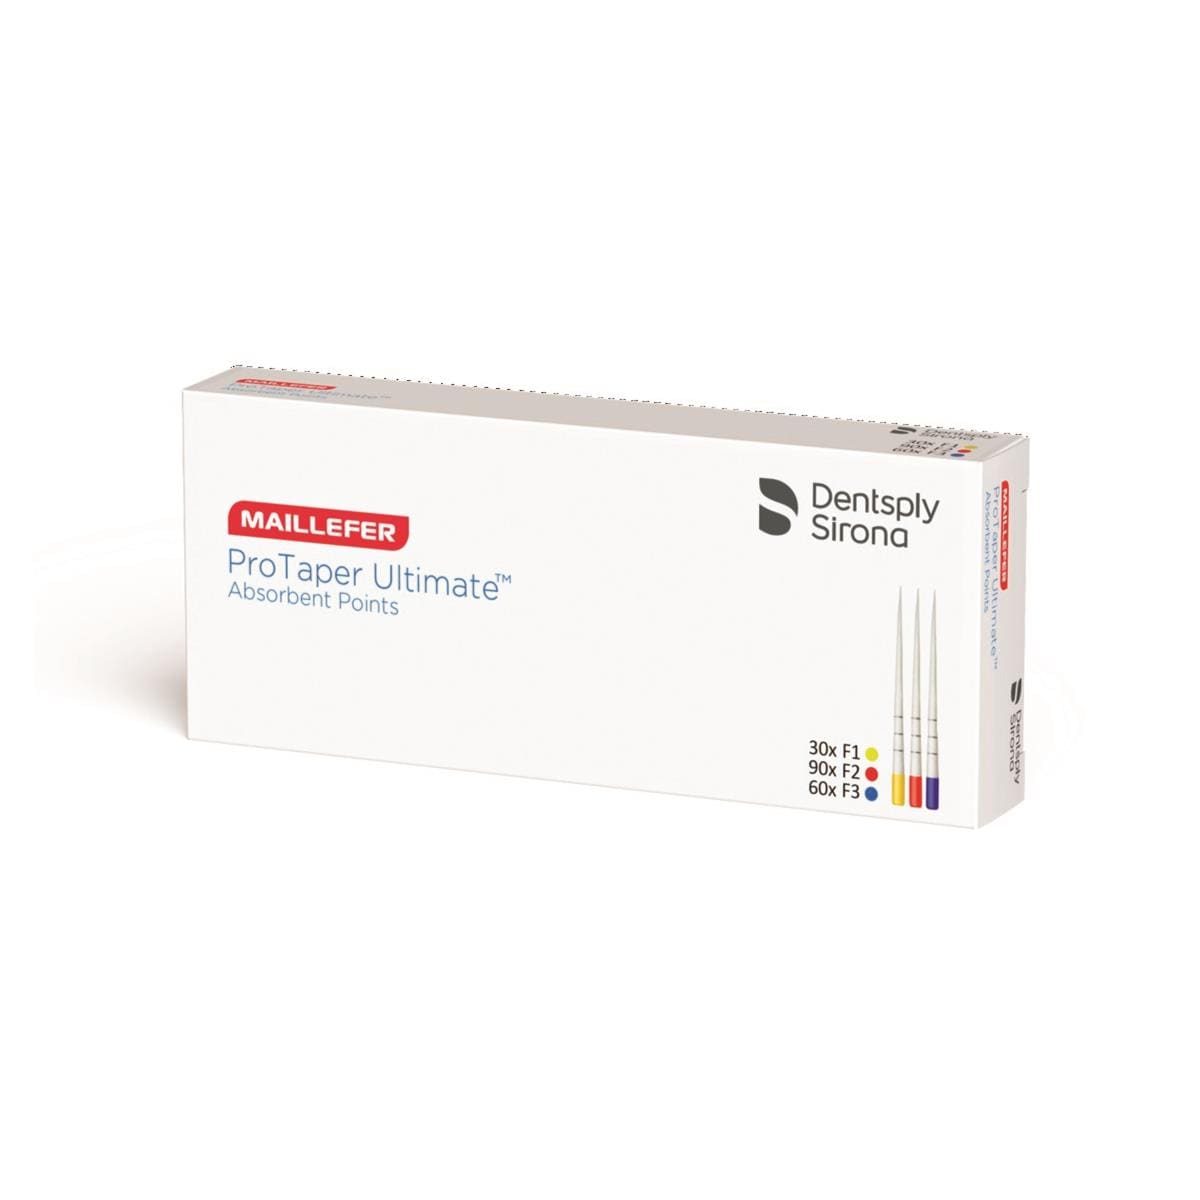 ProTaper Ultimate Absorbent Point F1-F3 (bote de 180) Dentsply Sirona